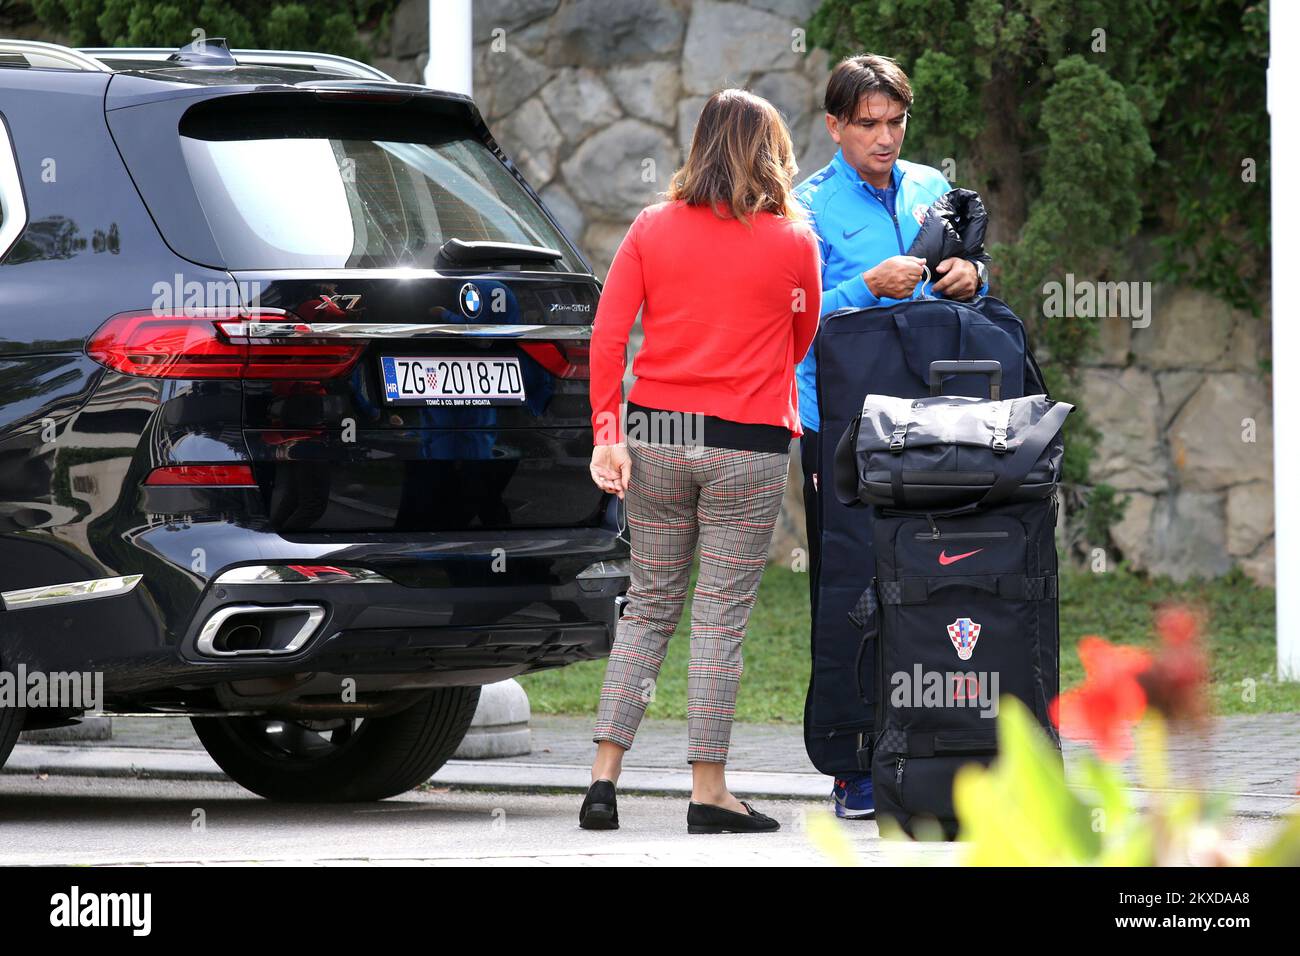 07.10.2019, Split - Coach of Croatian national football team Zlatko Dalic, accompanied by his wife Davorka, arrives at the gathering of the Croatian football team at the Hotel Le Meridien Lav. Croatia will play against Hungary on 10 October at Poljud Stadium in qualification for EURO 2020. Photo: Miranda Cikotic/PIXSELL Stock Photo